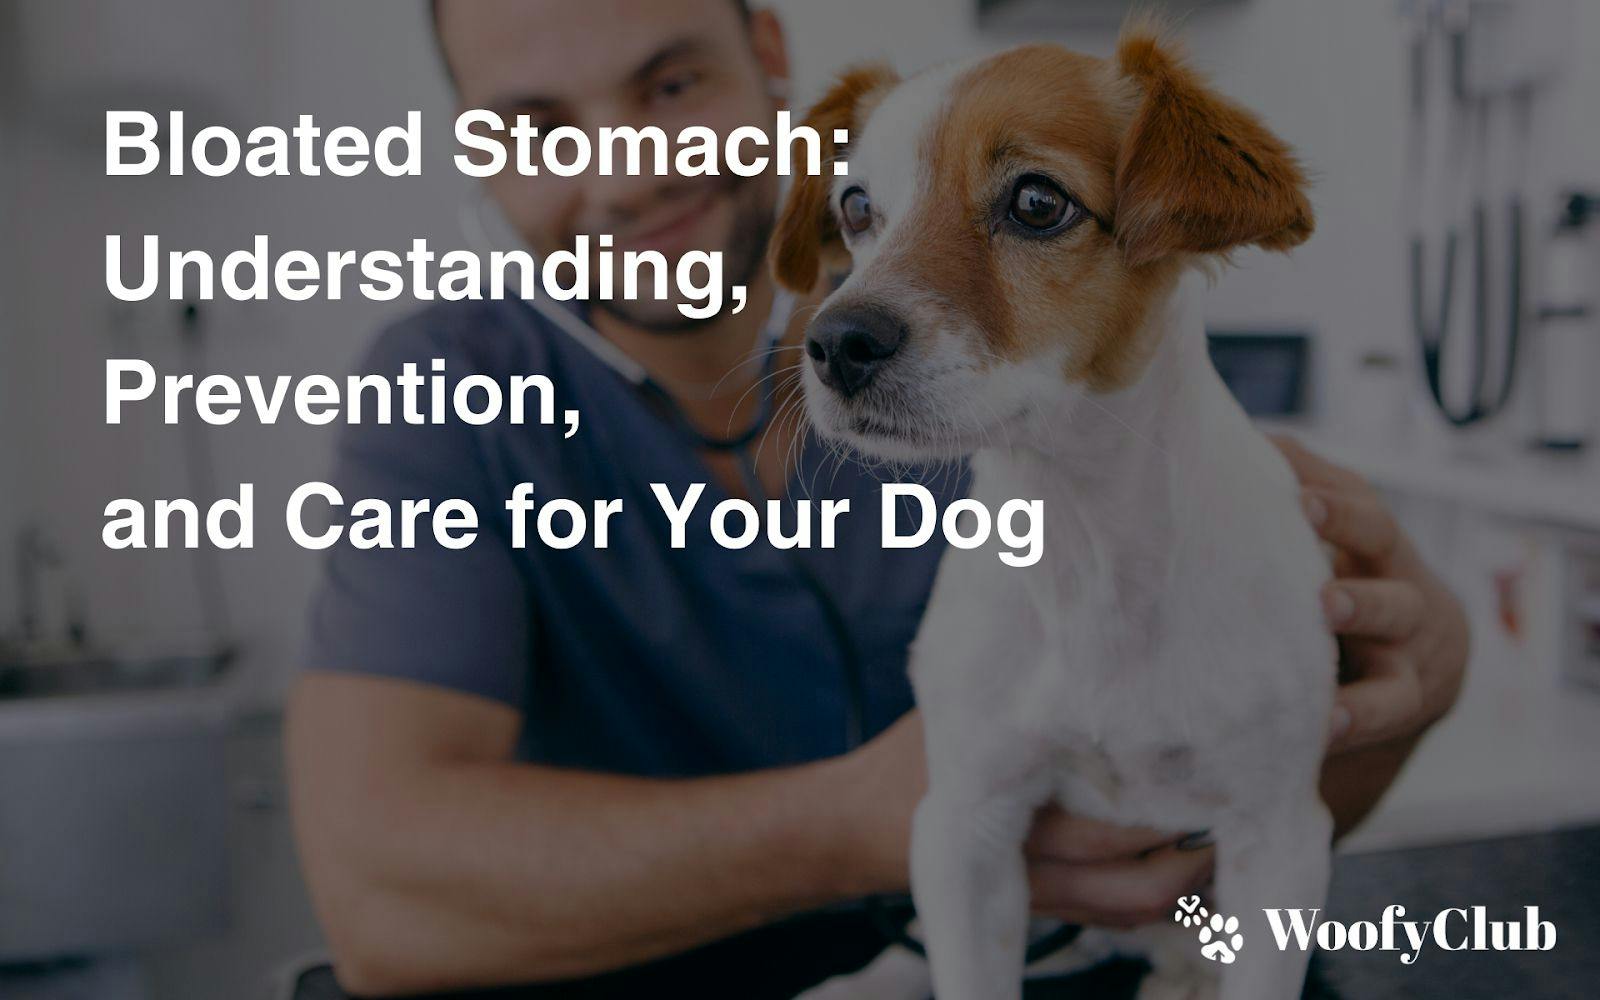 Bloated Stomach: Understanding, Prevention, And Care For Your Dog